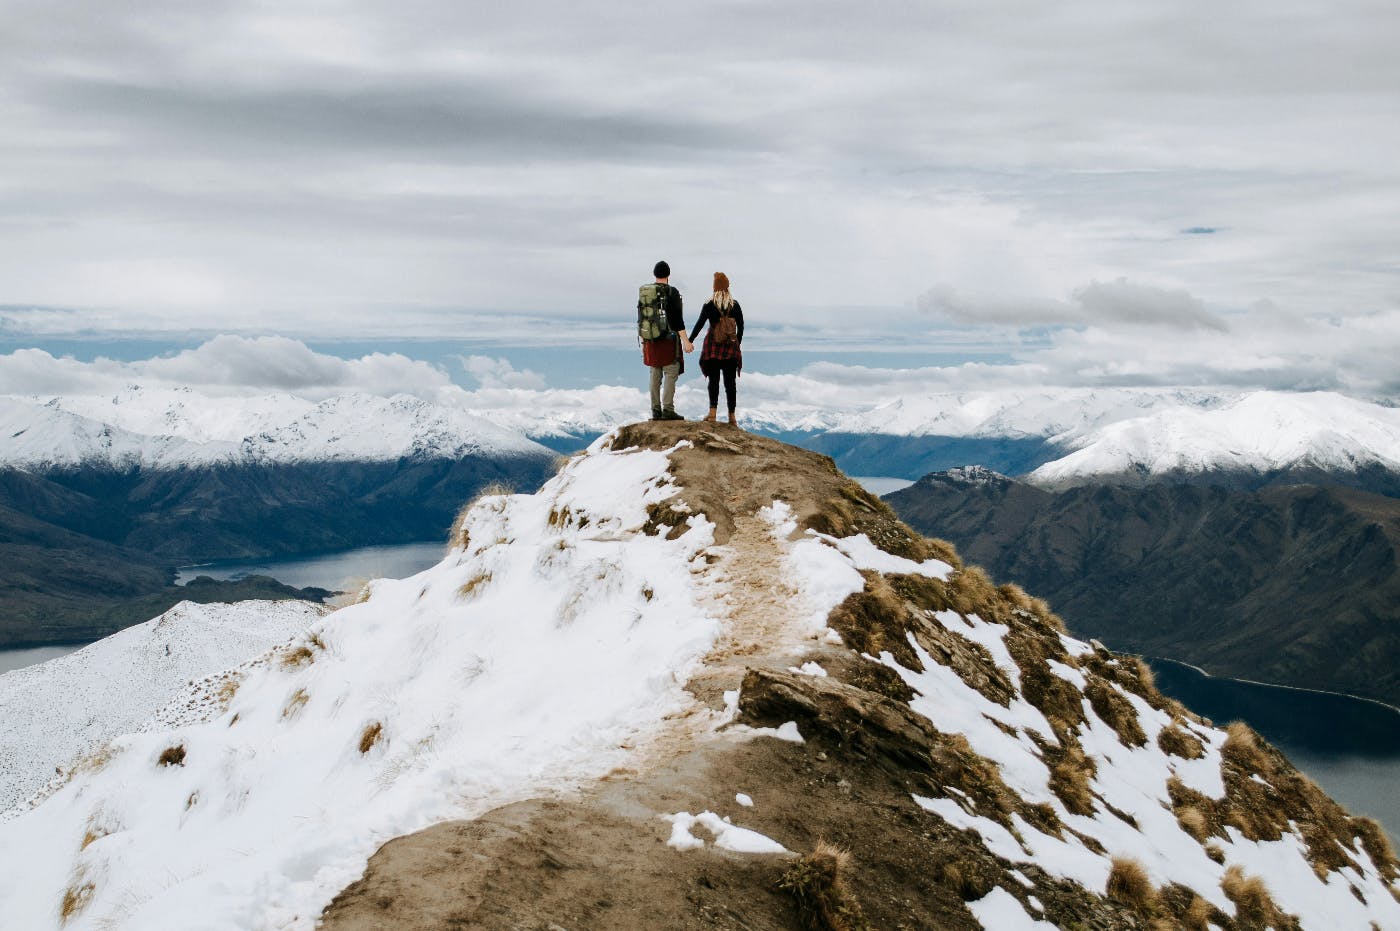 A man and woman standing at the top of mountain holding hands